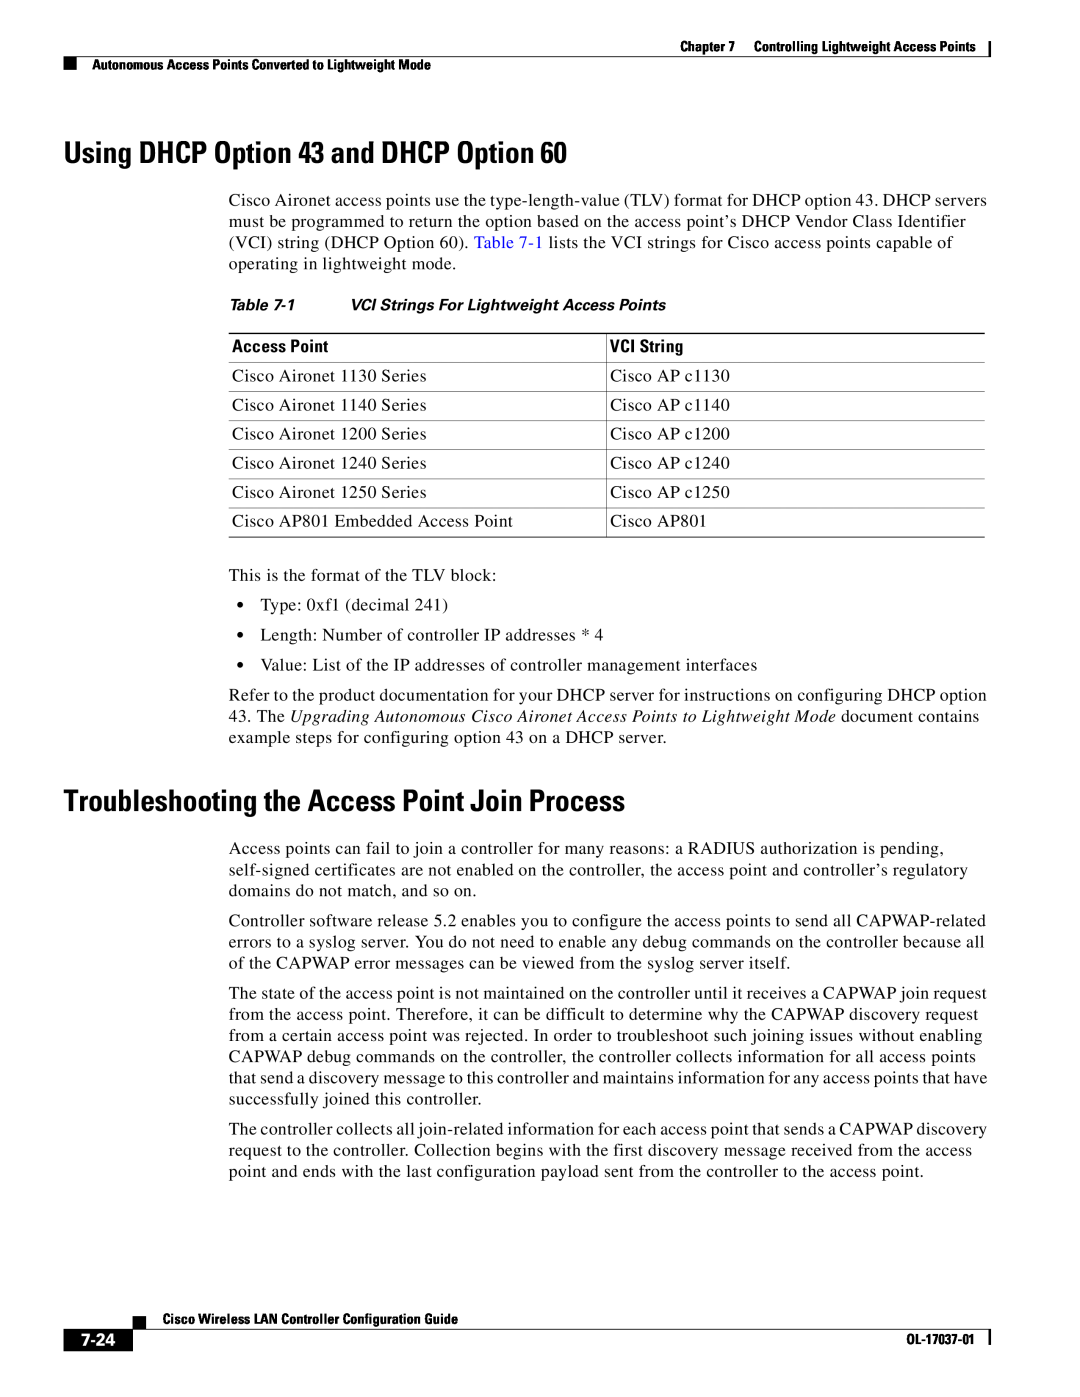 Cisco Systems OL-17037-01 Using DHCP Option 43 and DHCP Option, Troubleshooting the Access Point Join Process, VCI String 